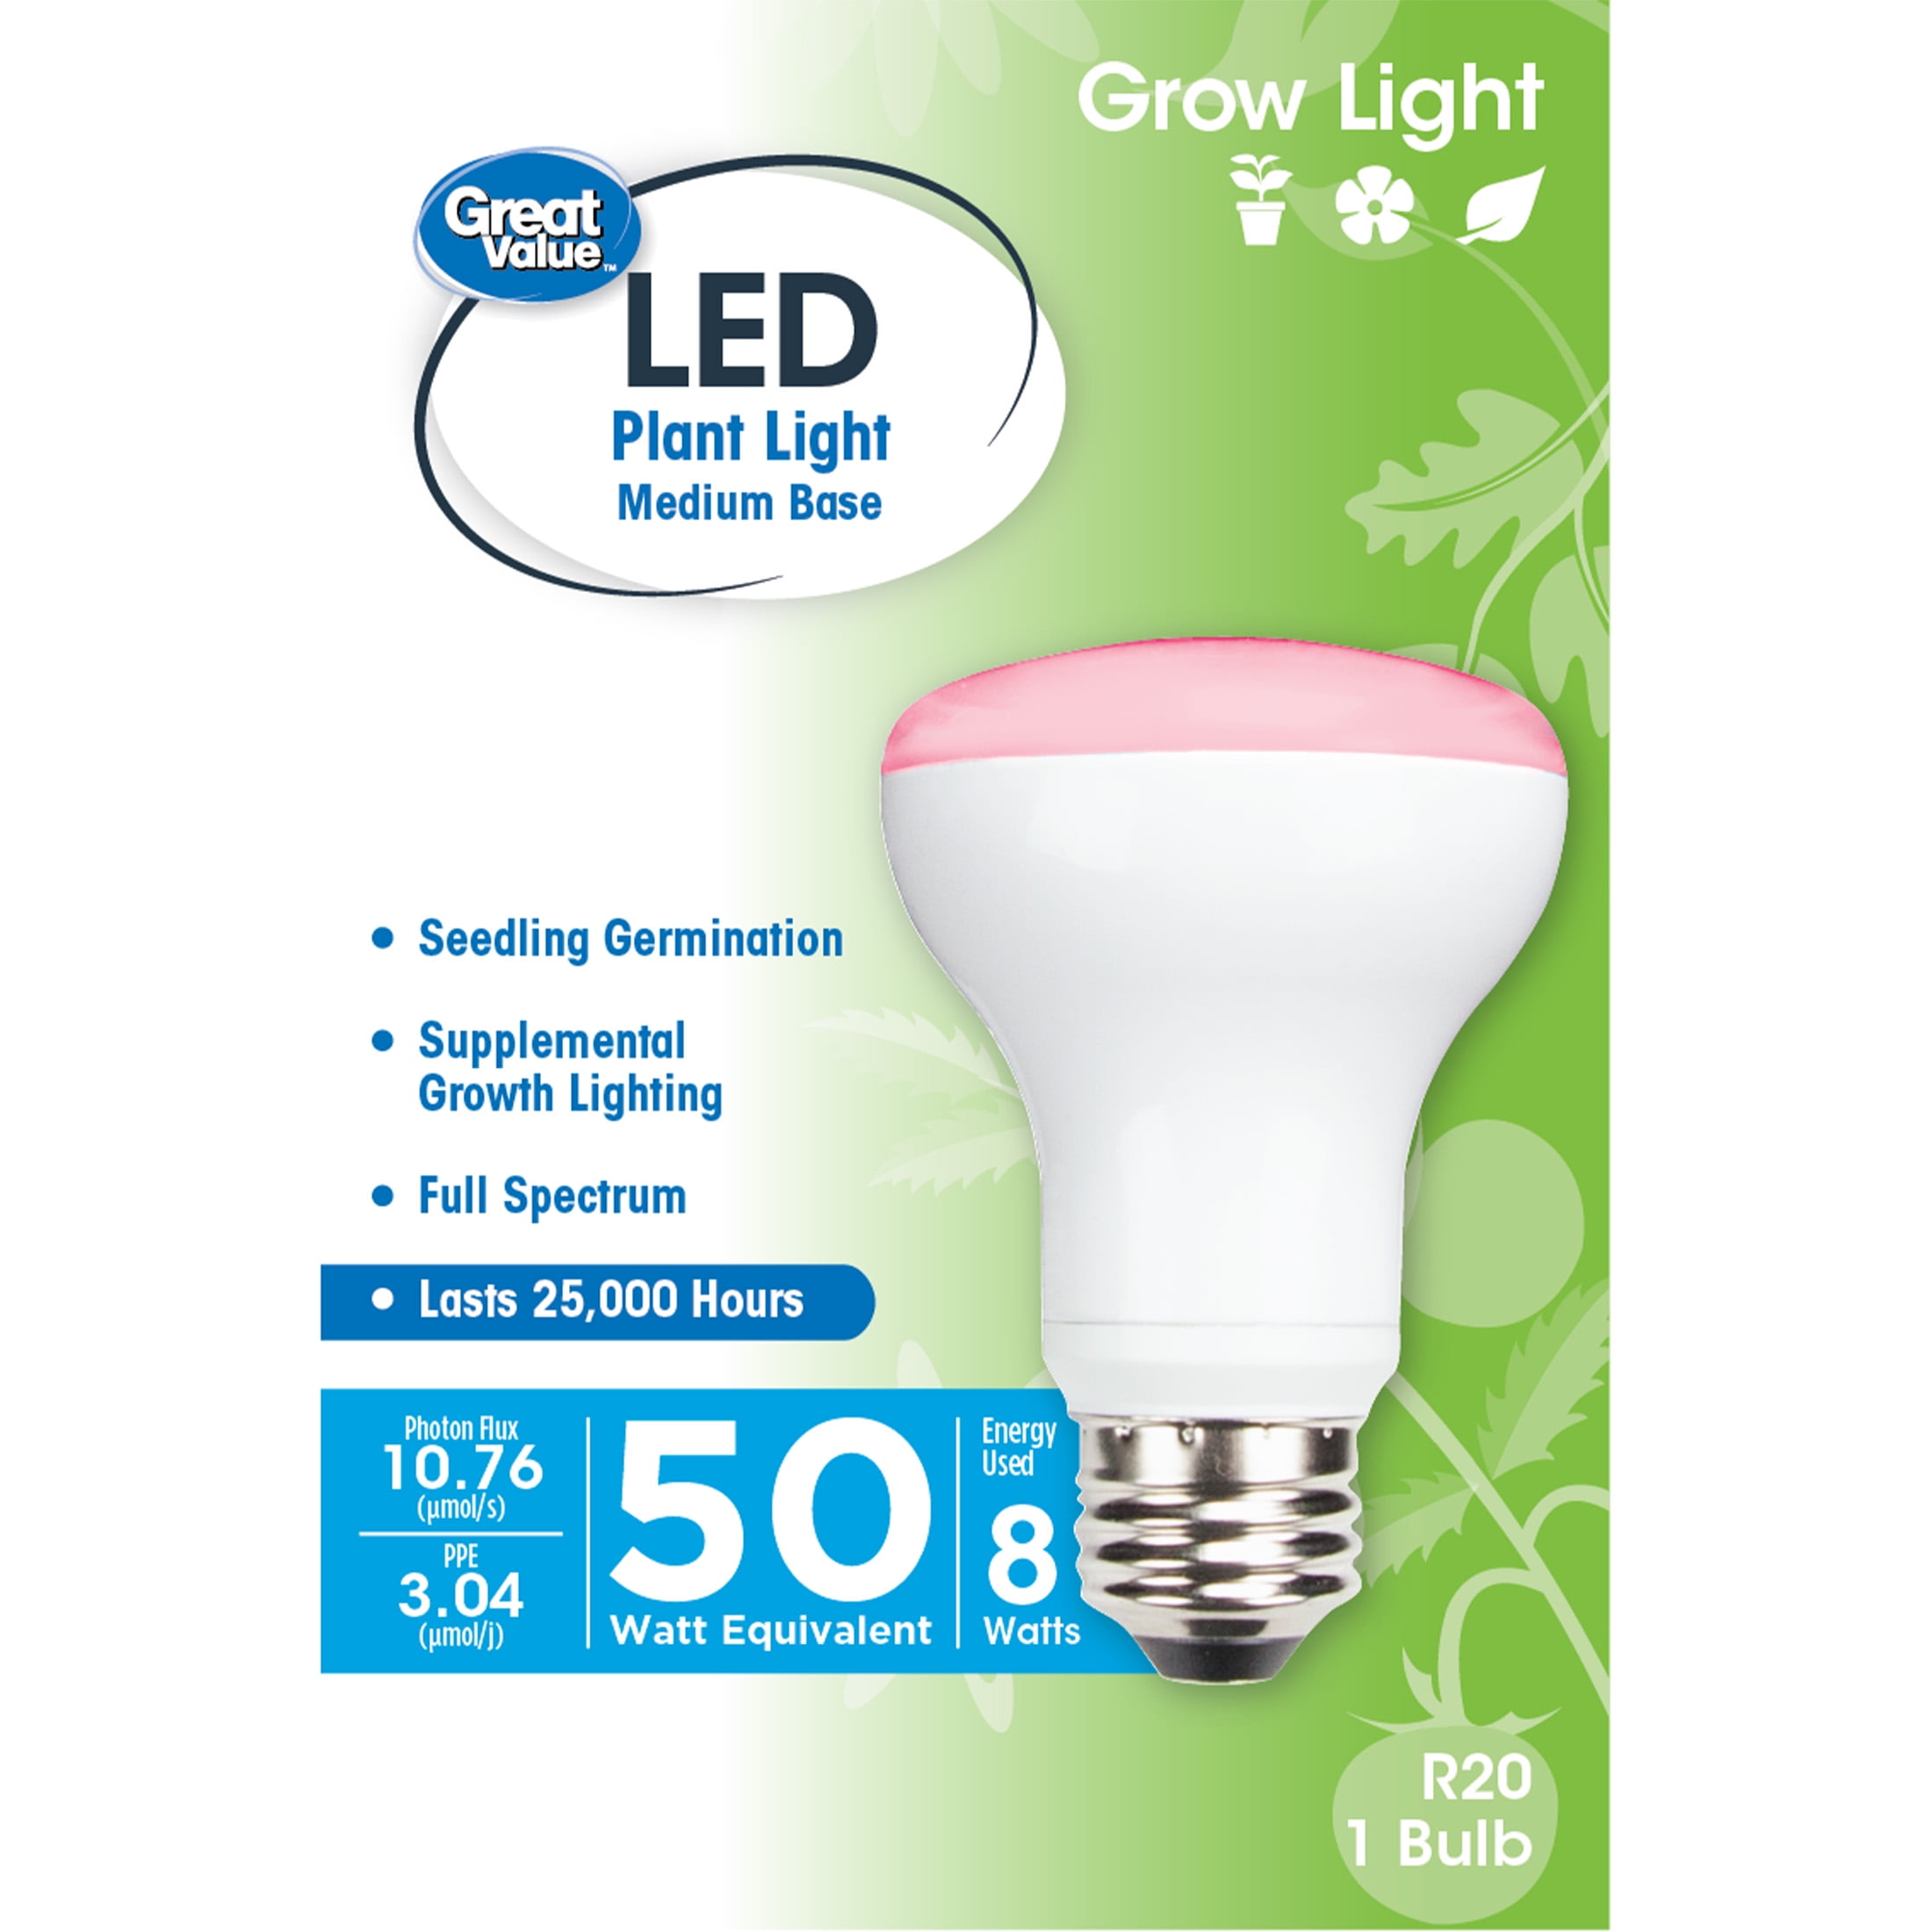 4.5 H x 2.25 D 448nm Blue to 630nm red spectrums Feit Electric A19/GROW/LEDG2/BX 60W Equivalent 9W Indoor Greenhouse Garden Outdoor Full Non-Dimmable A19 Plant Grow Light Bulb